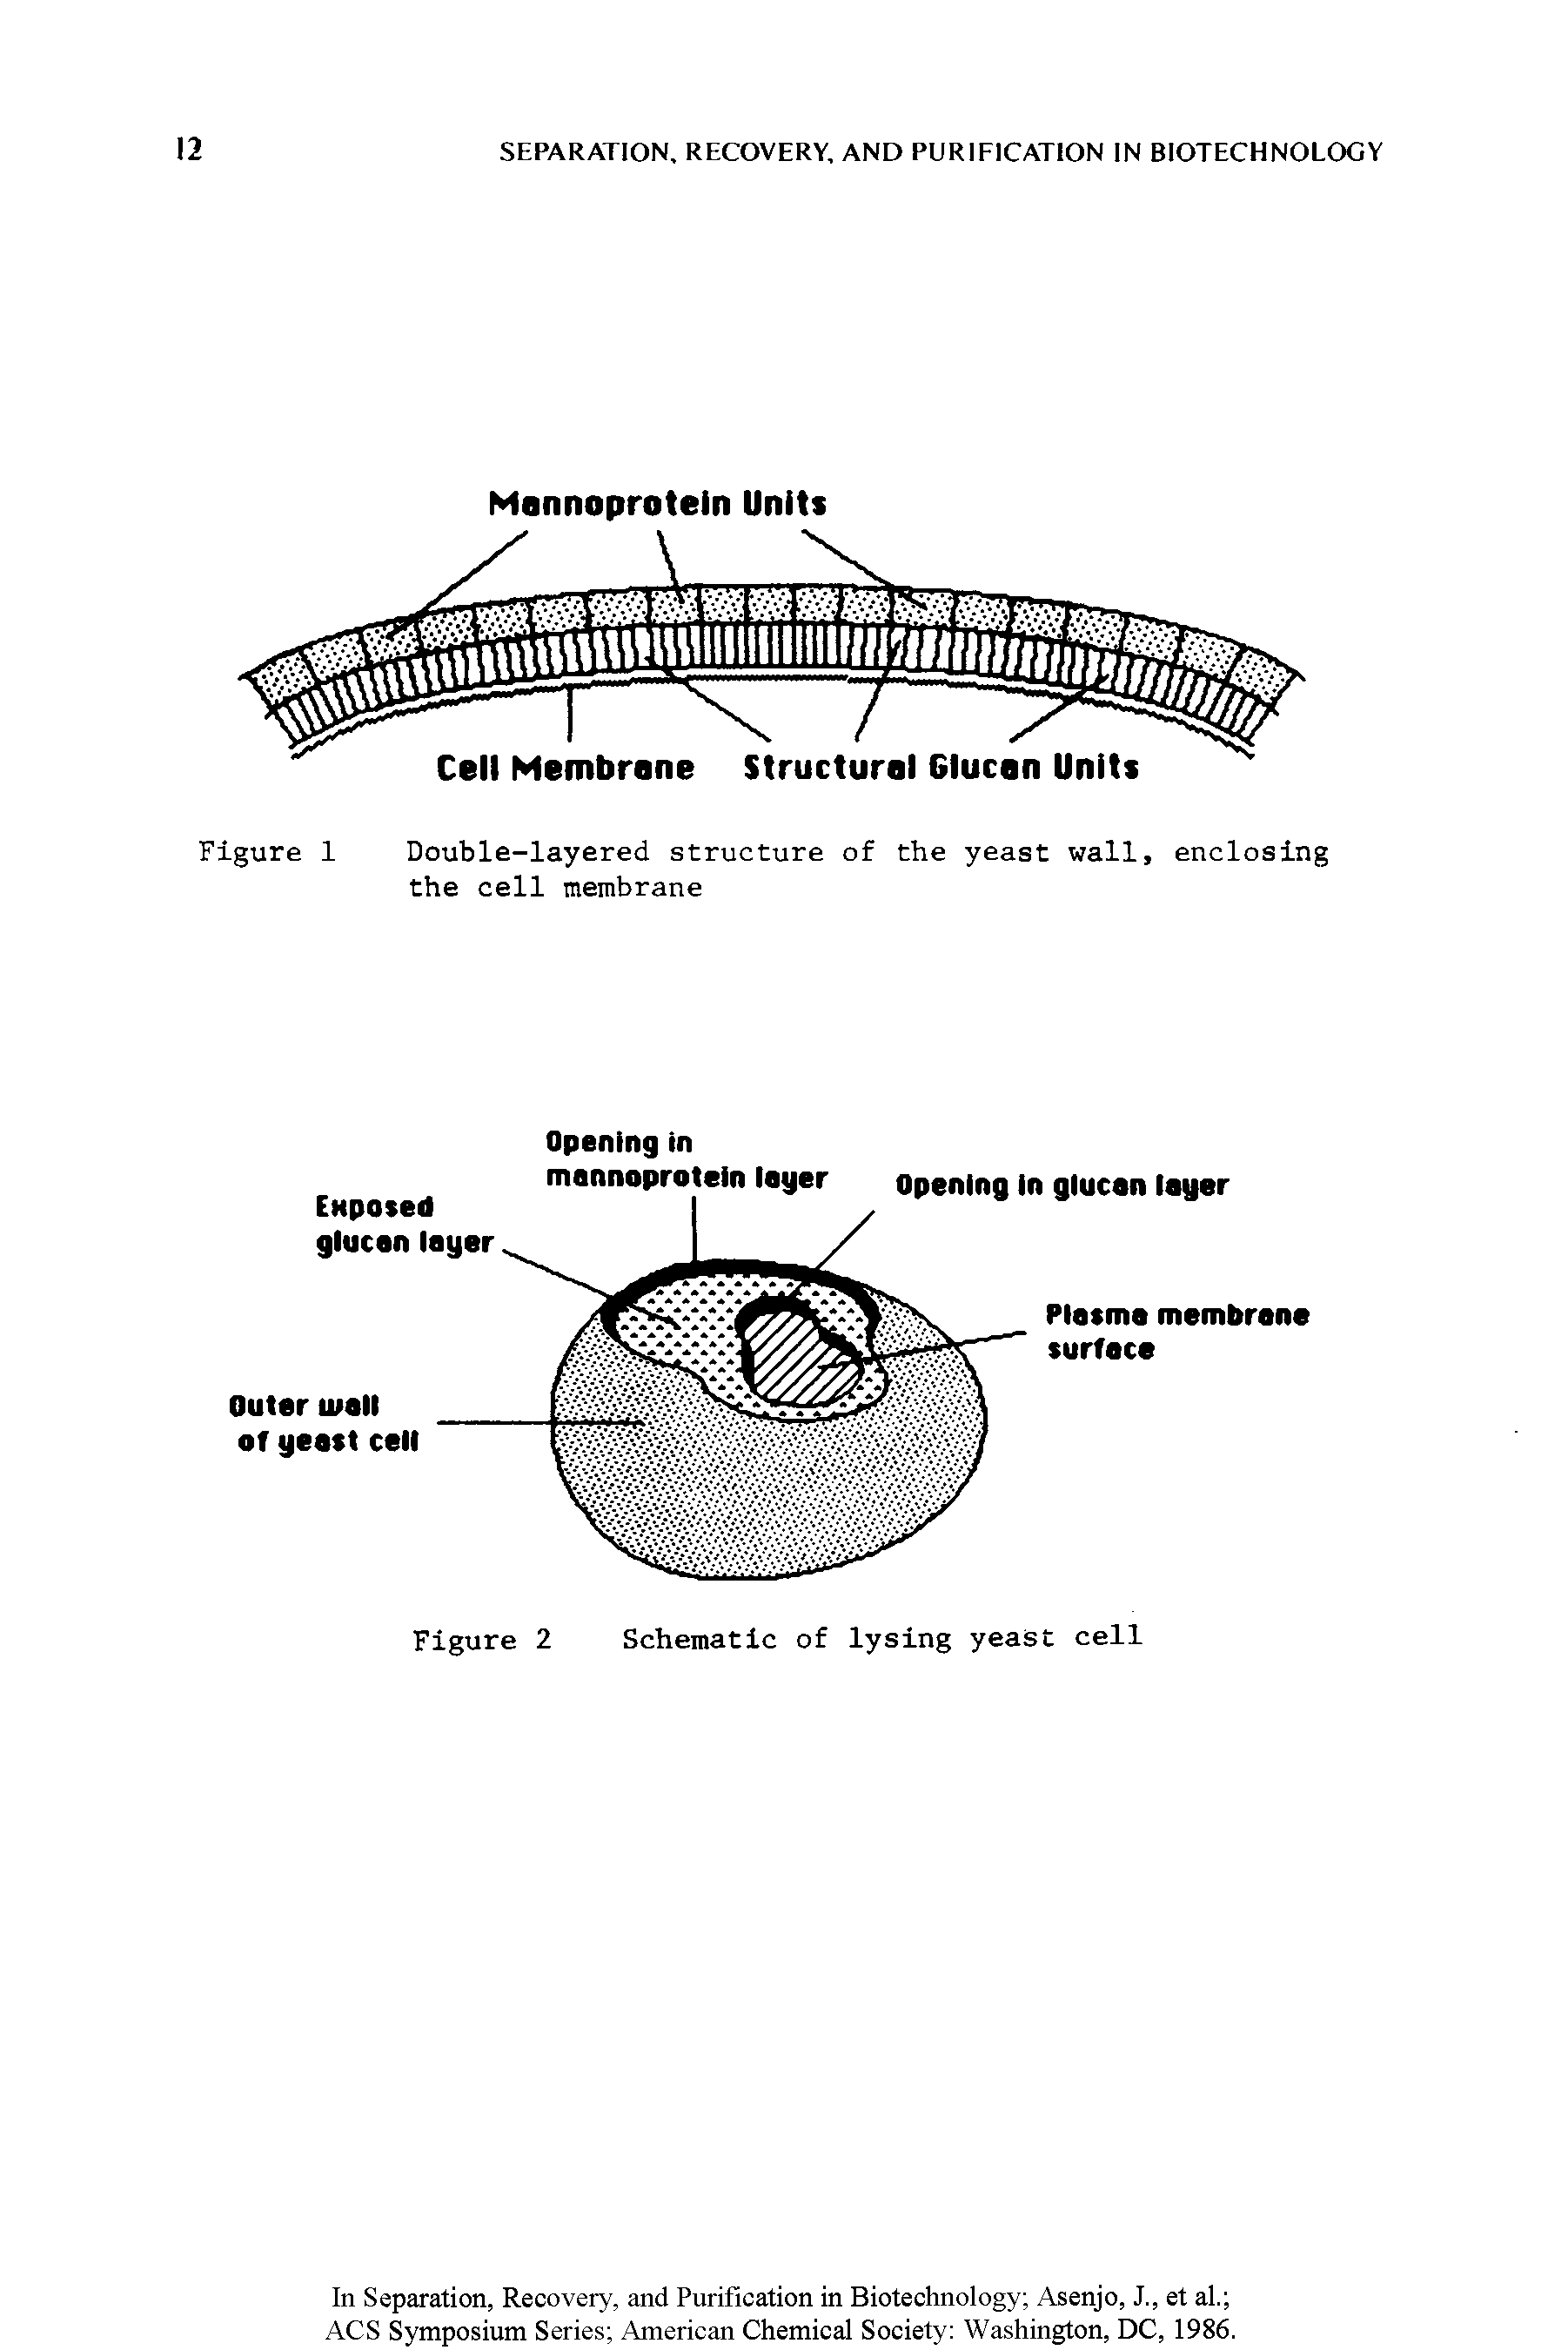 Figure 1 Double-layered structure of the yeast wall, enclosing the cell membrane...